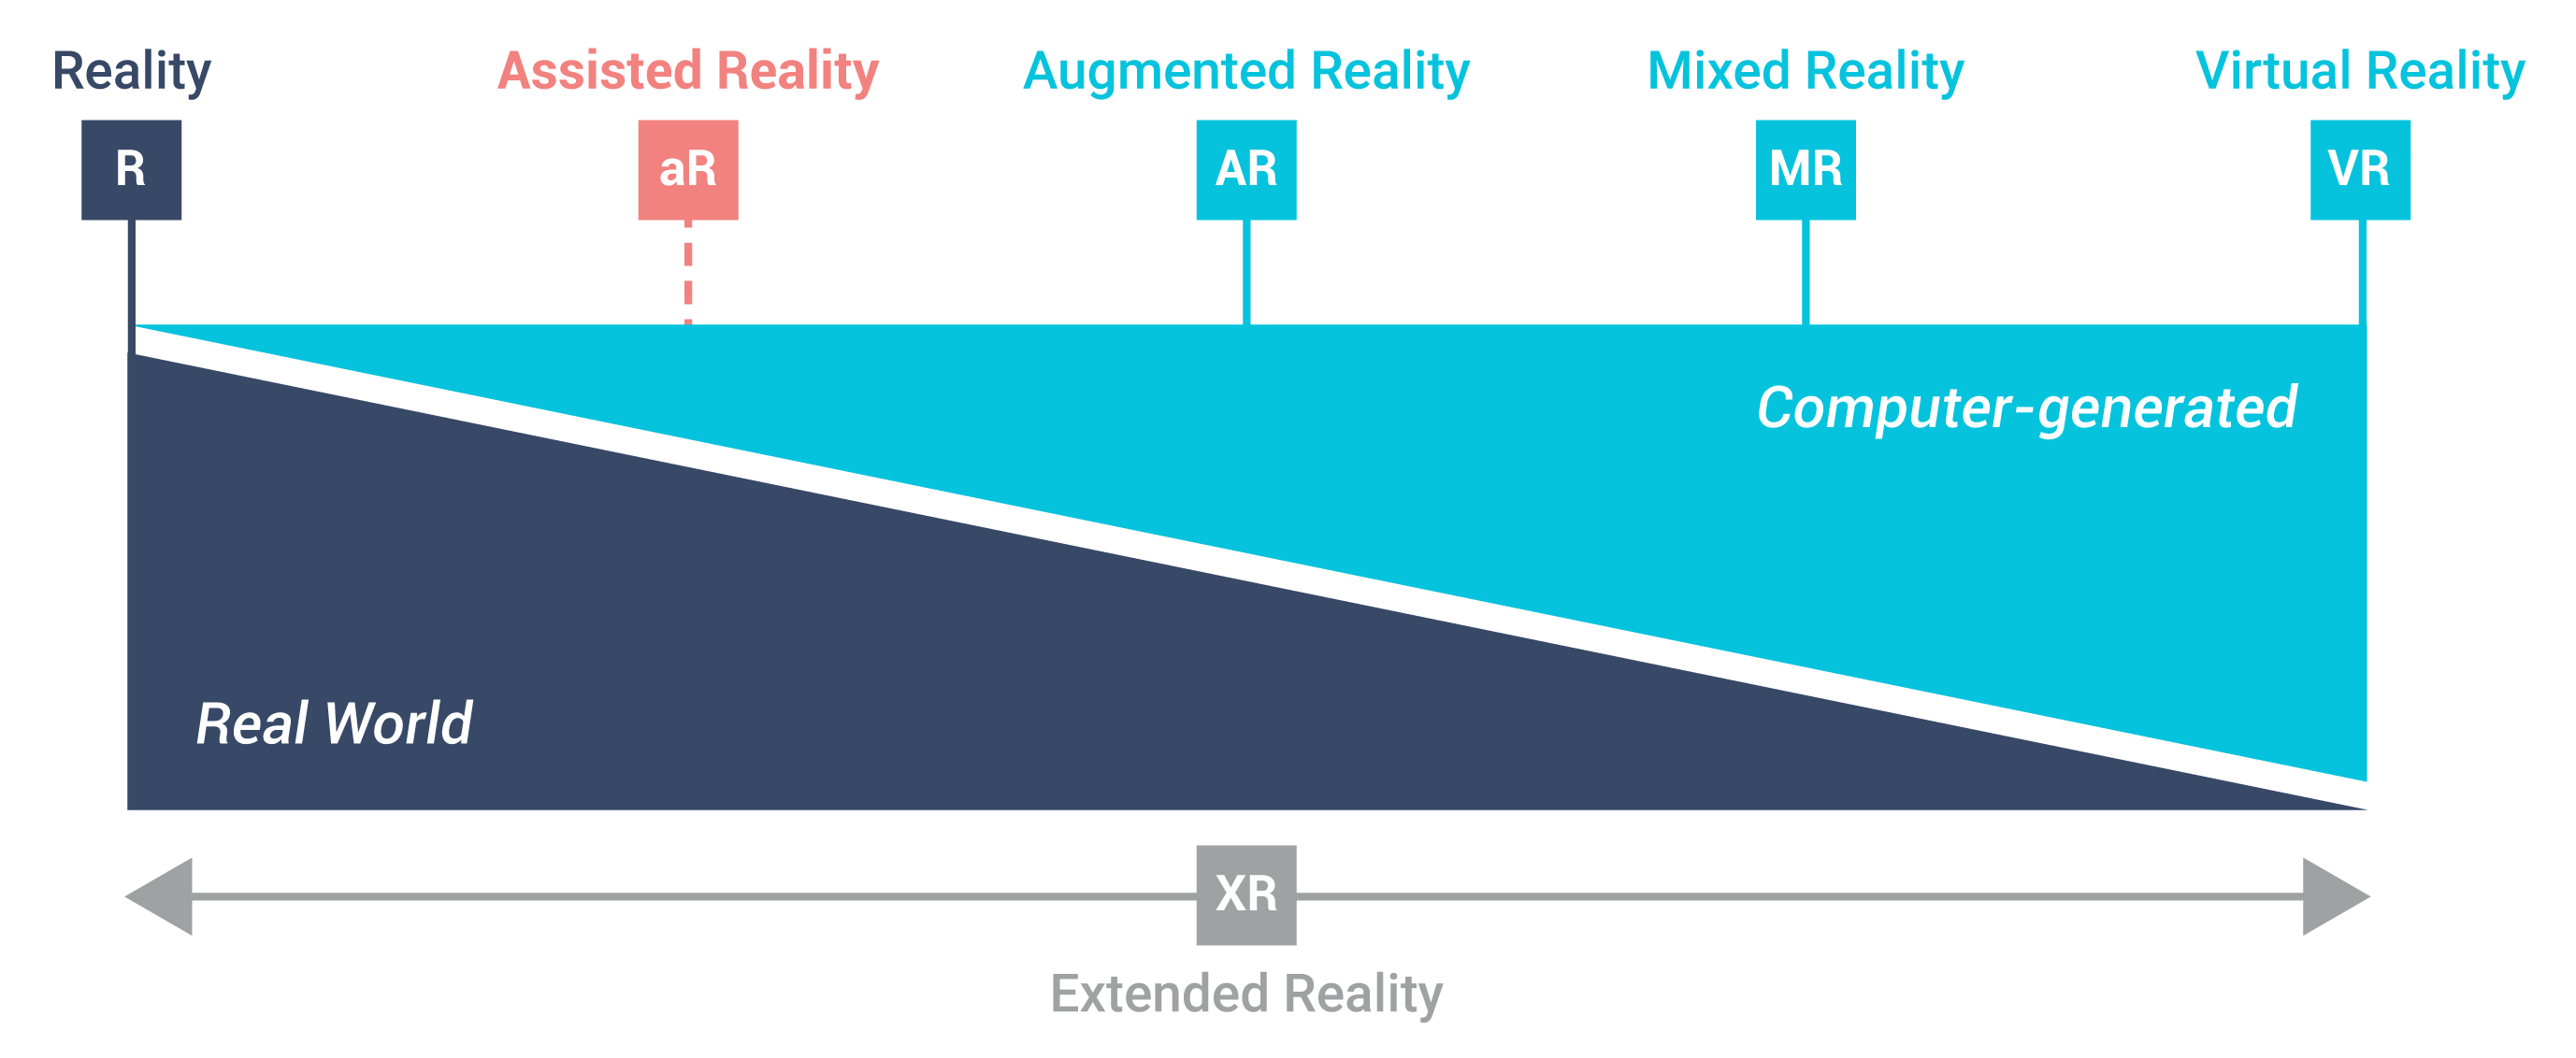 VR, AR, and aR, which technology to choose for your business?